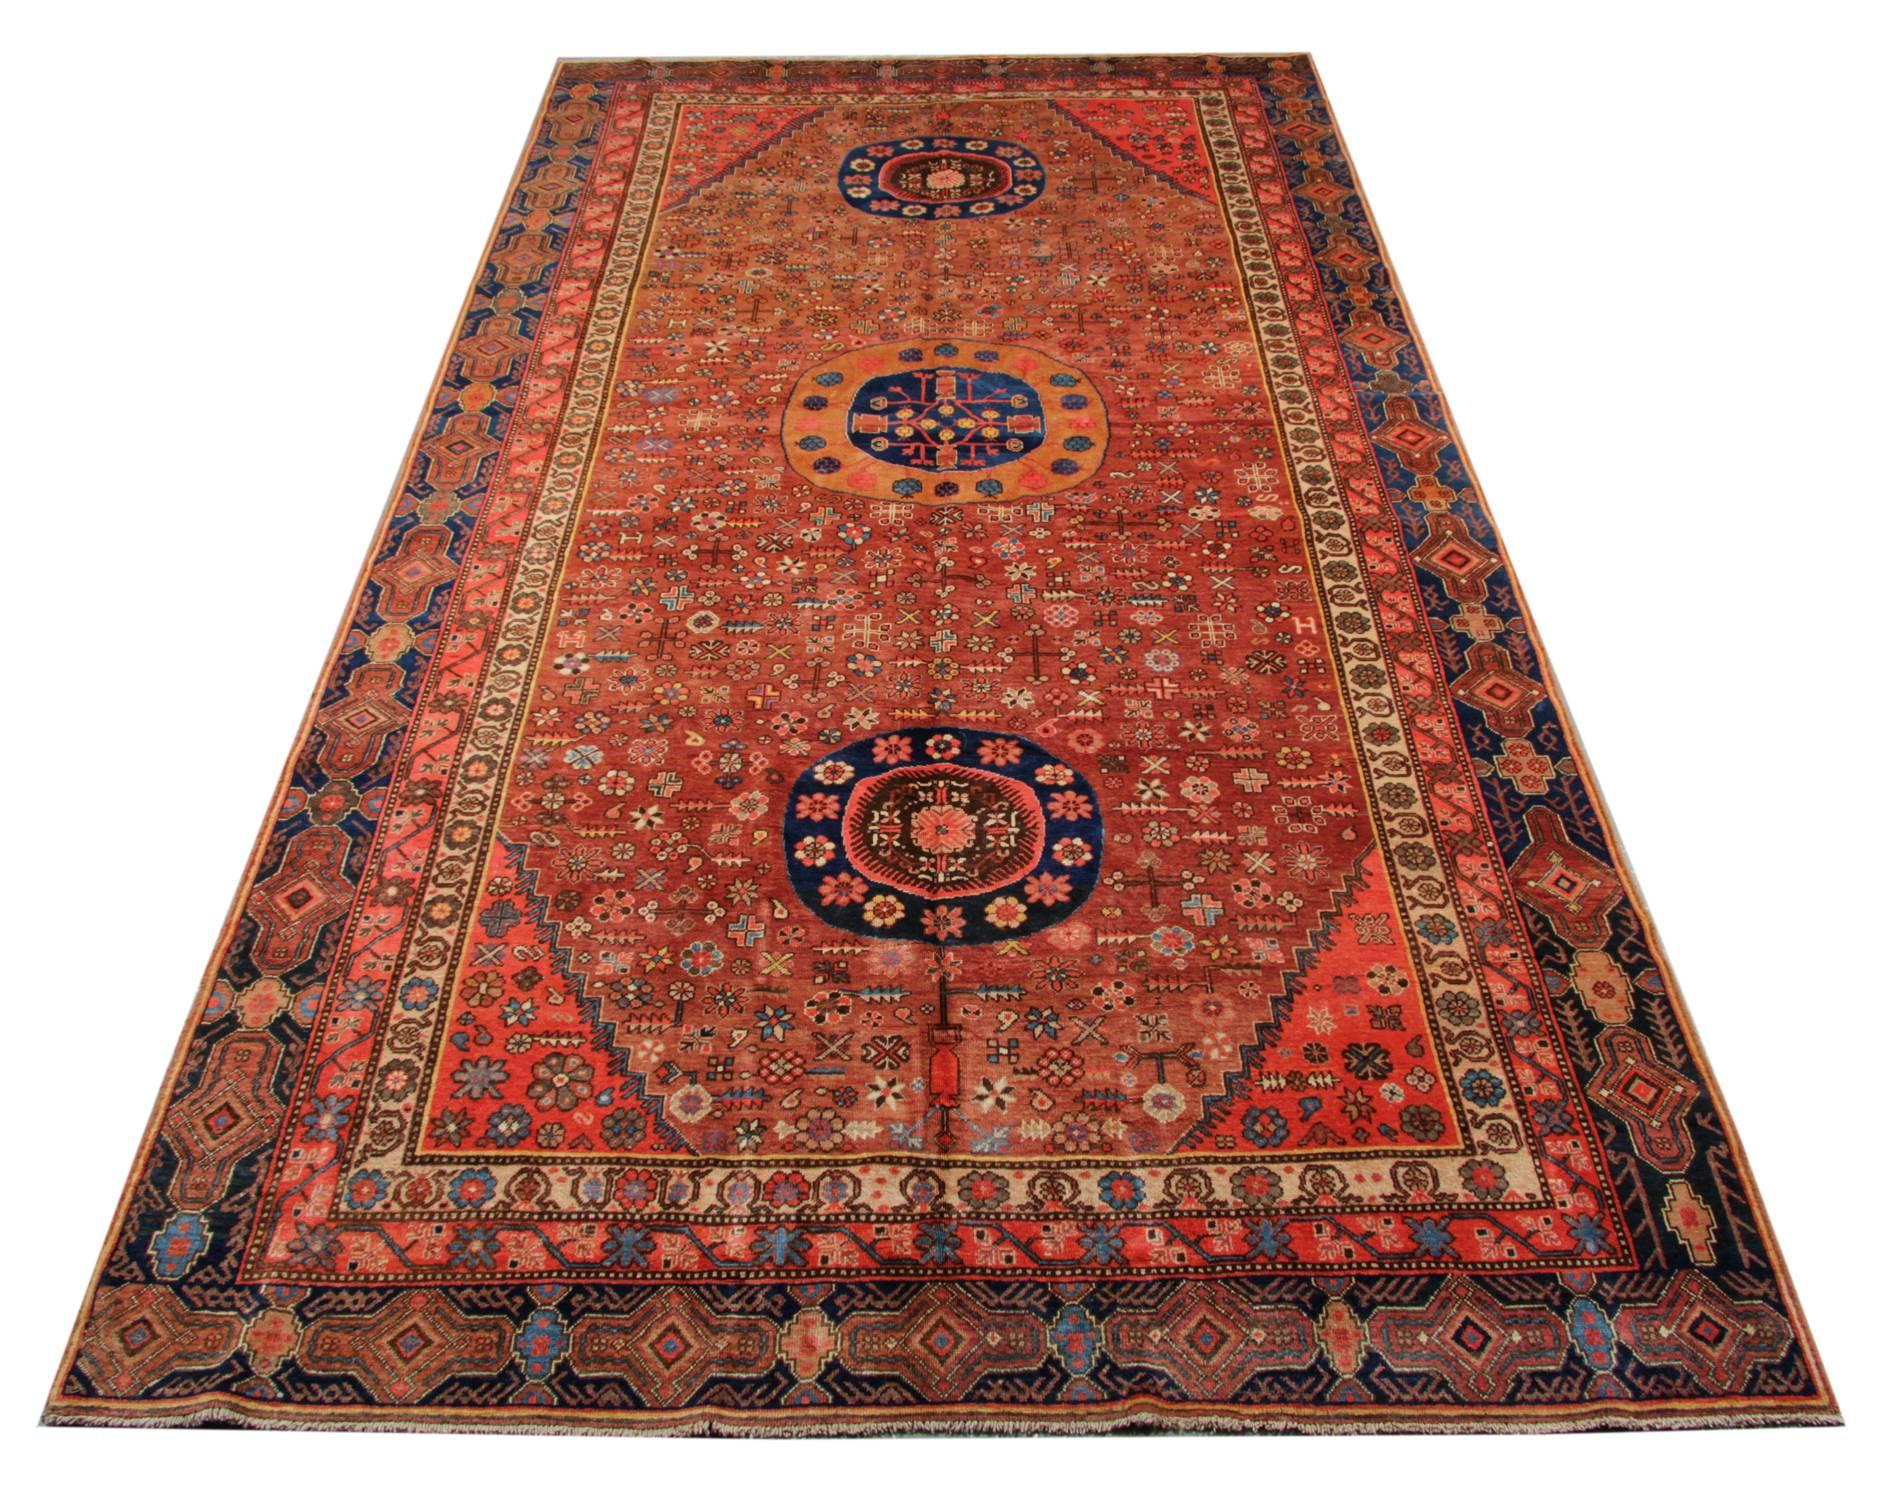 Oriental Carpets from Khotan have a style that is all their own. This orange rug has three beautiful circulars medallions and lots of beautiful historical motives on the rust field. This large rug for sale has a very nice colour combination in the